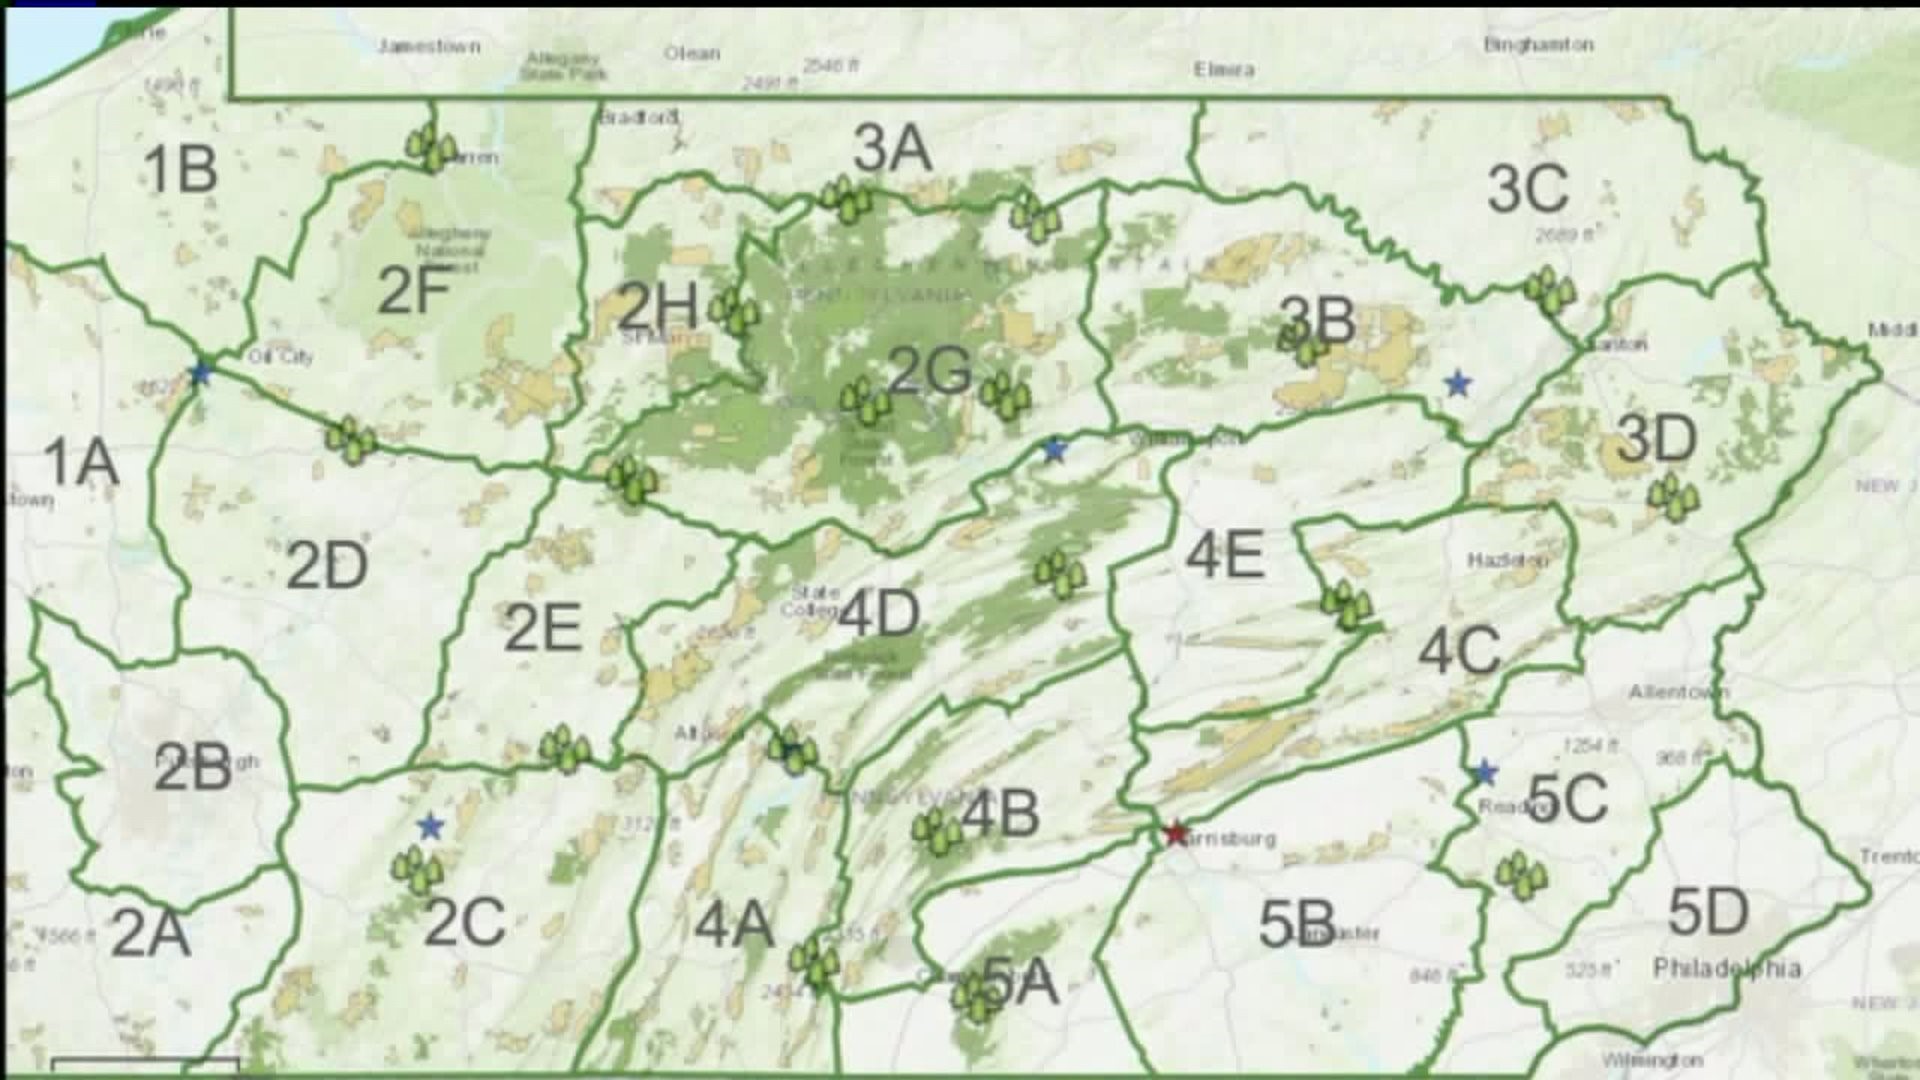 Hunters Weigh In on New Online Hunting Map